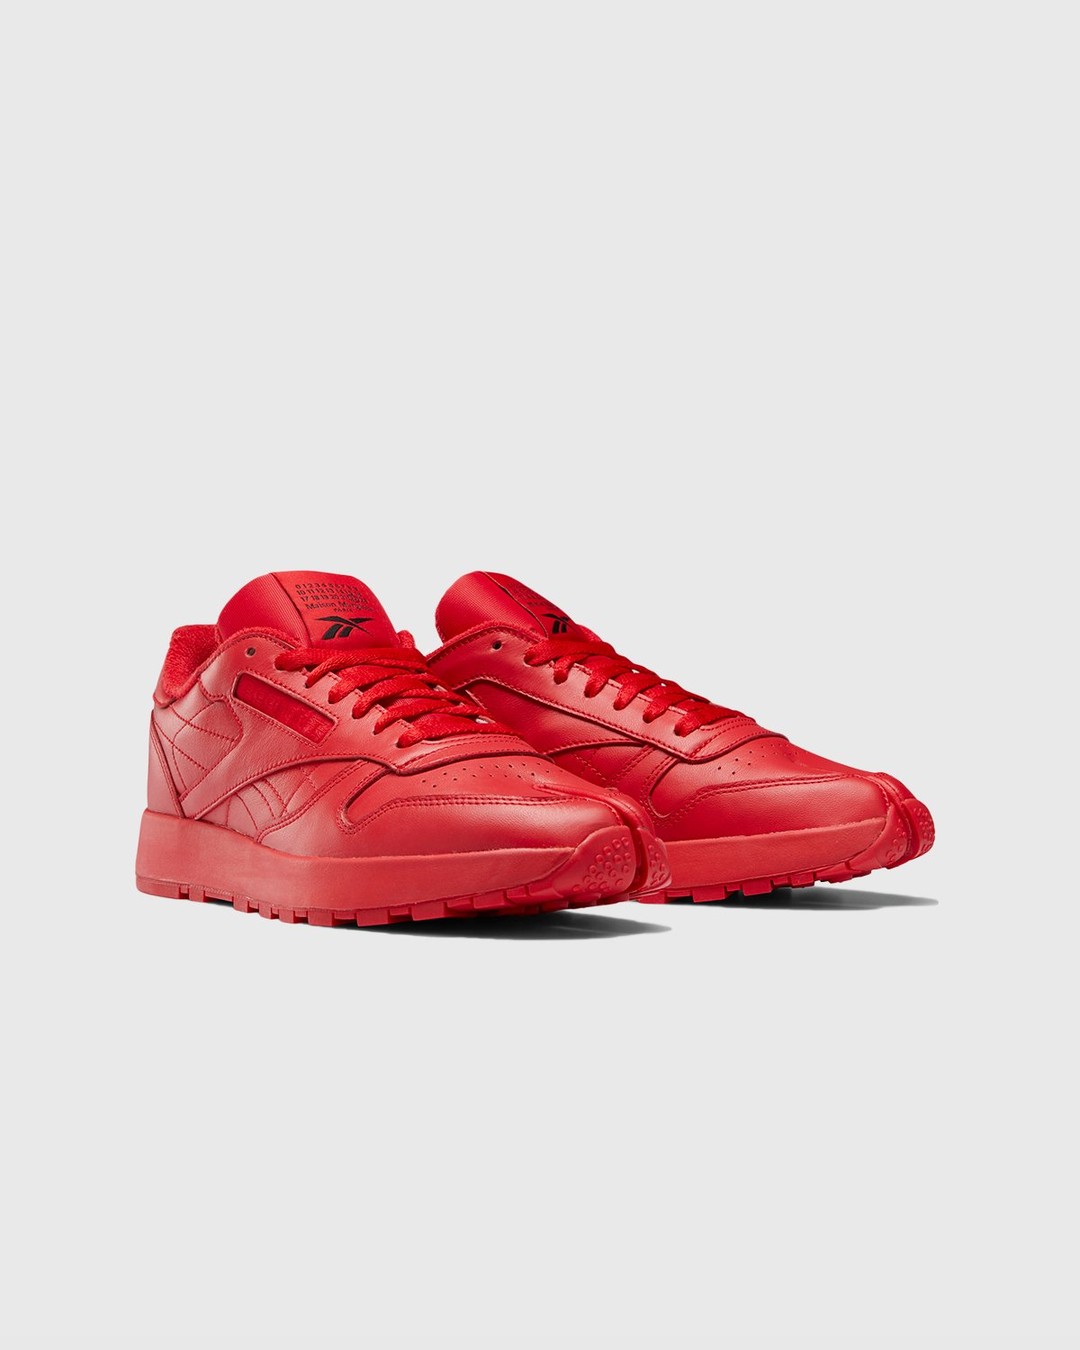 Maison Margiela x Reebok – Classic Leather Tabi Red - Sneakers - Red - Image 2